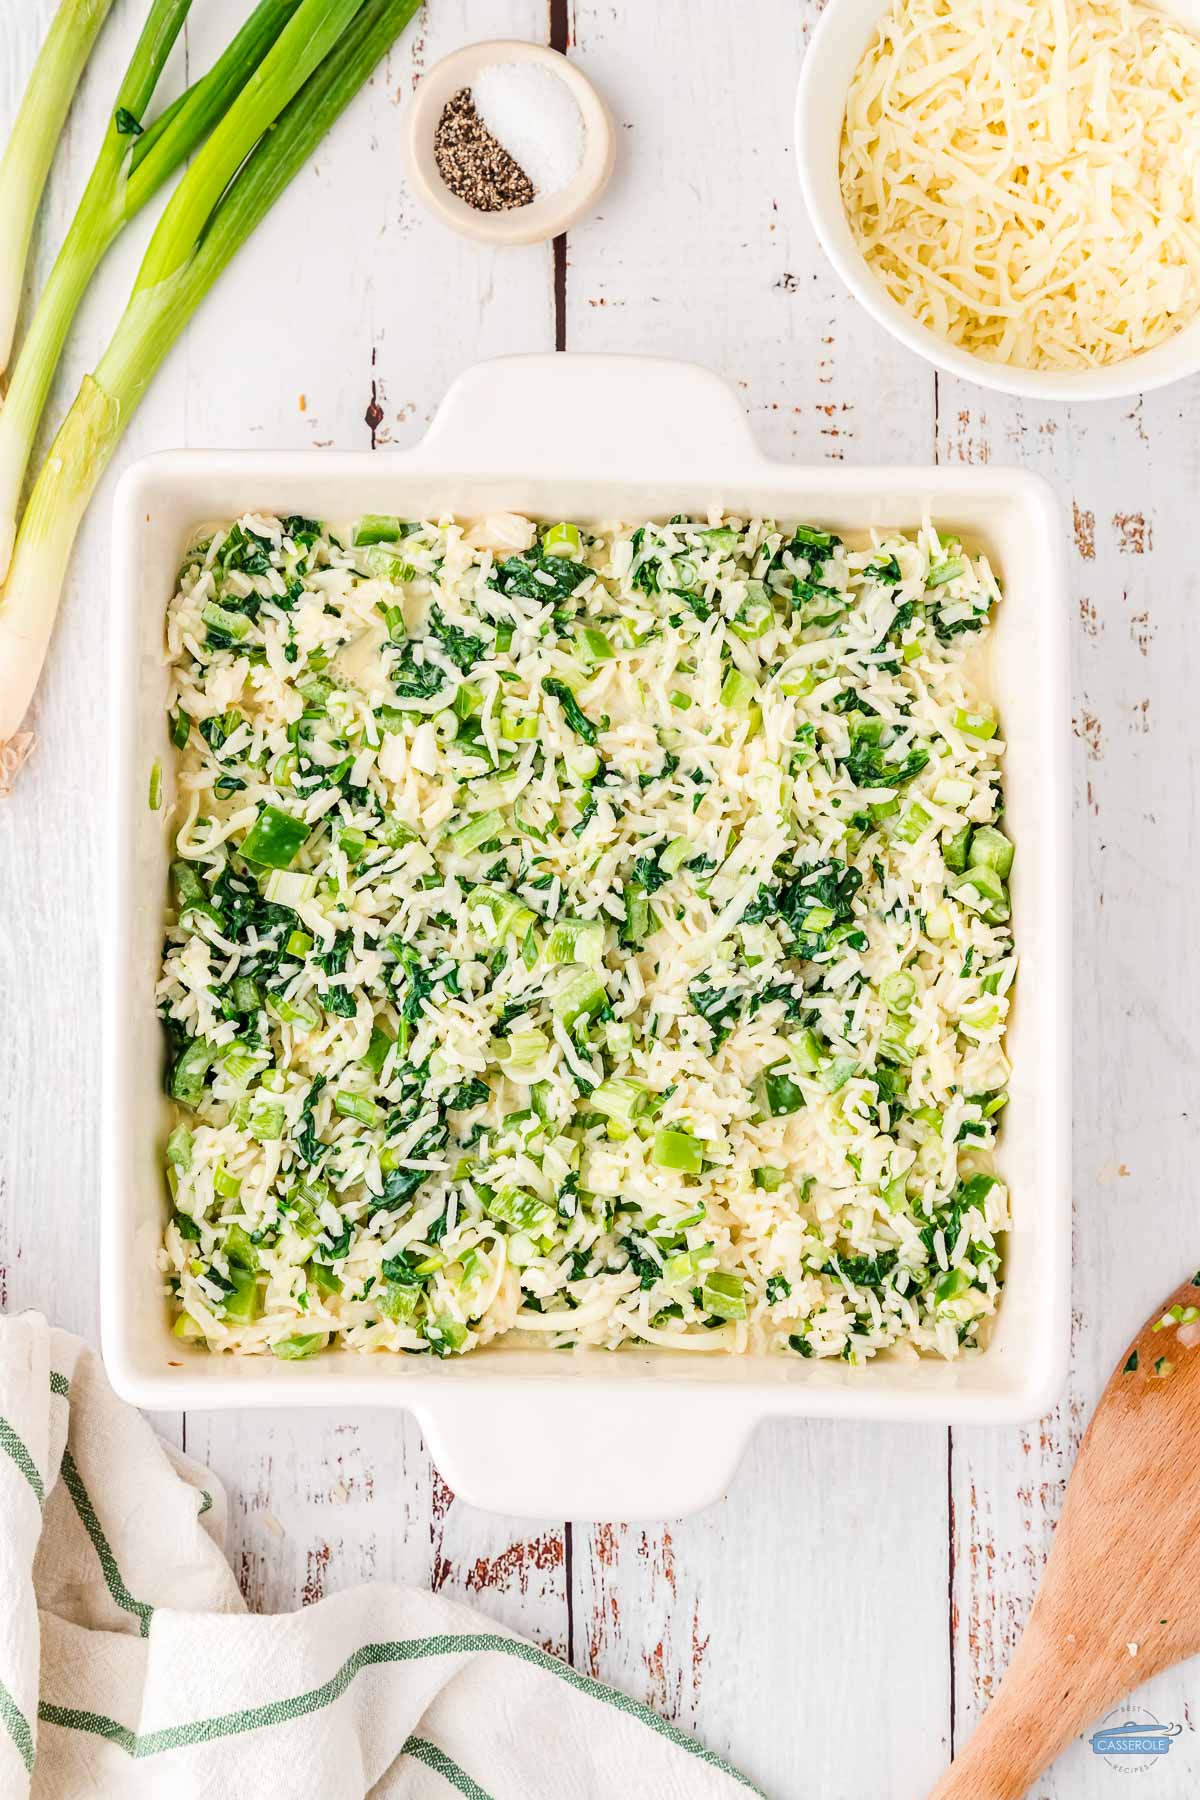 unbaked green rice casserole in a square dish